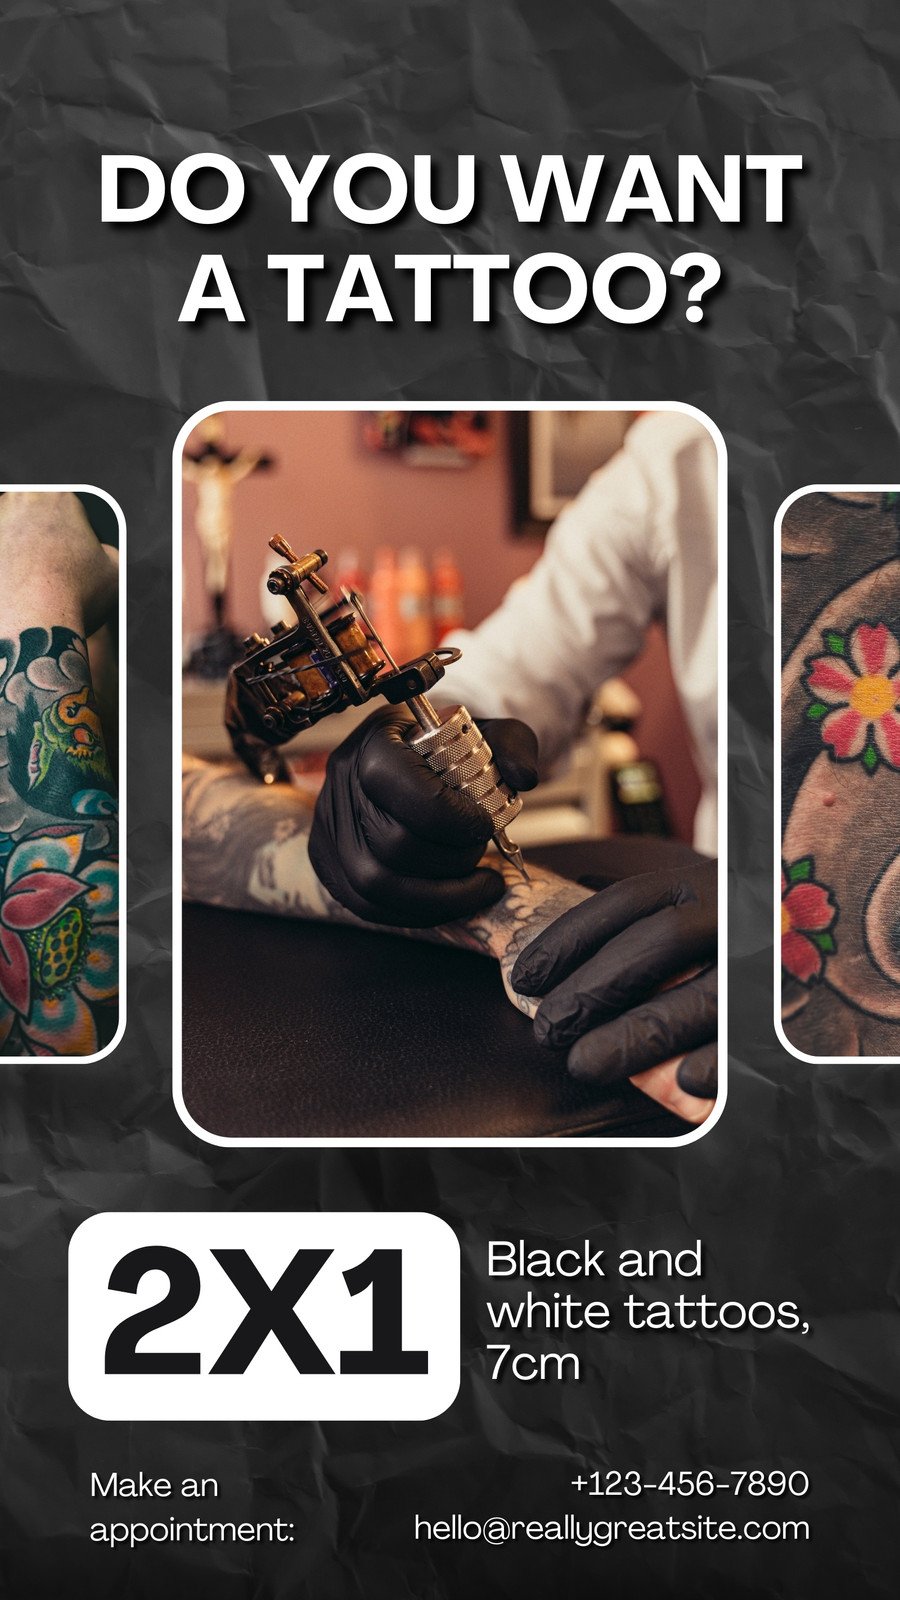 Red Dragon Tattoo Offers Organic Ink Services in New York, NY 10032